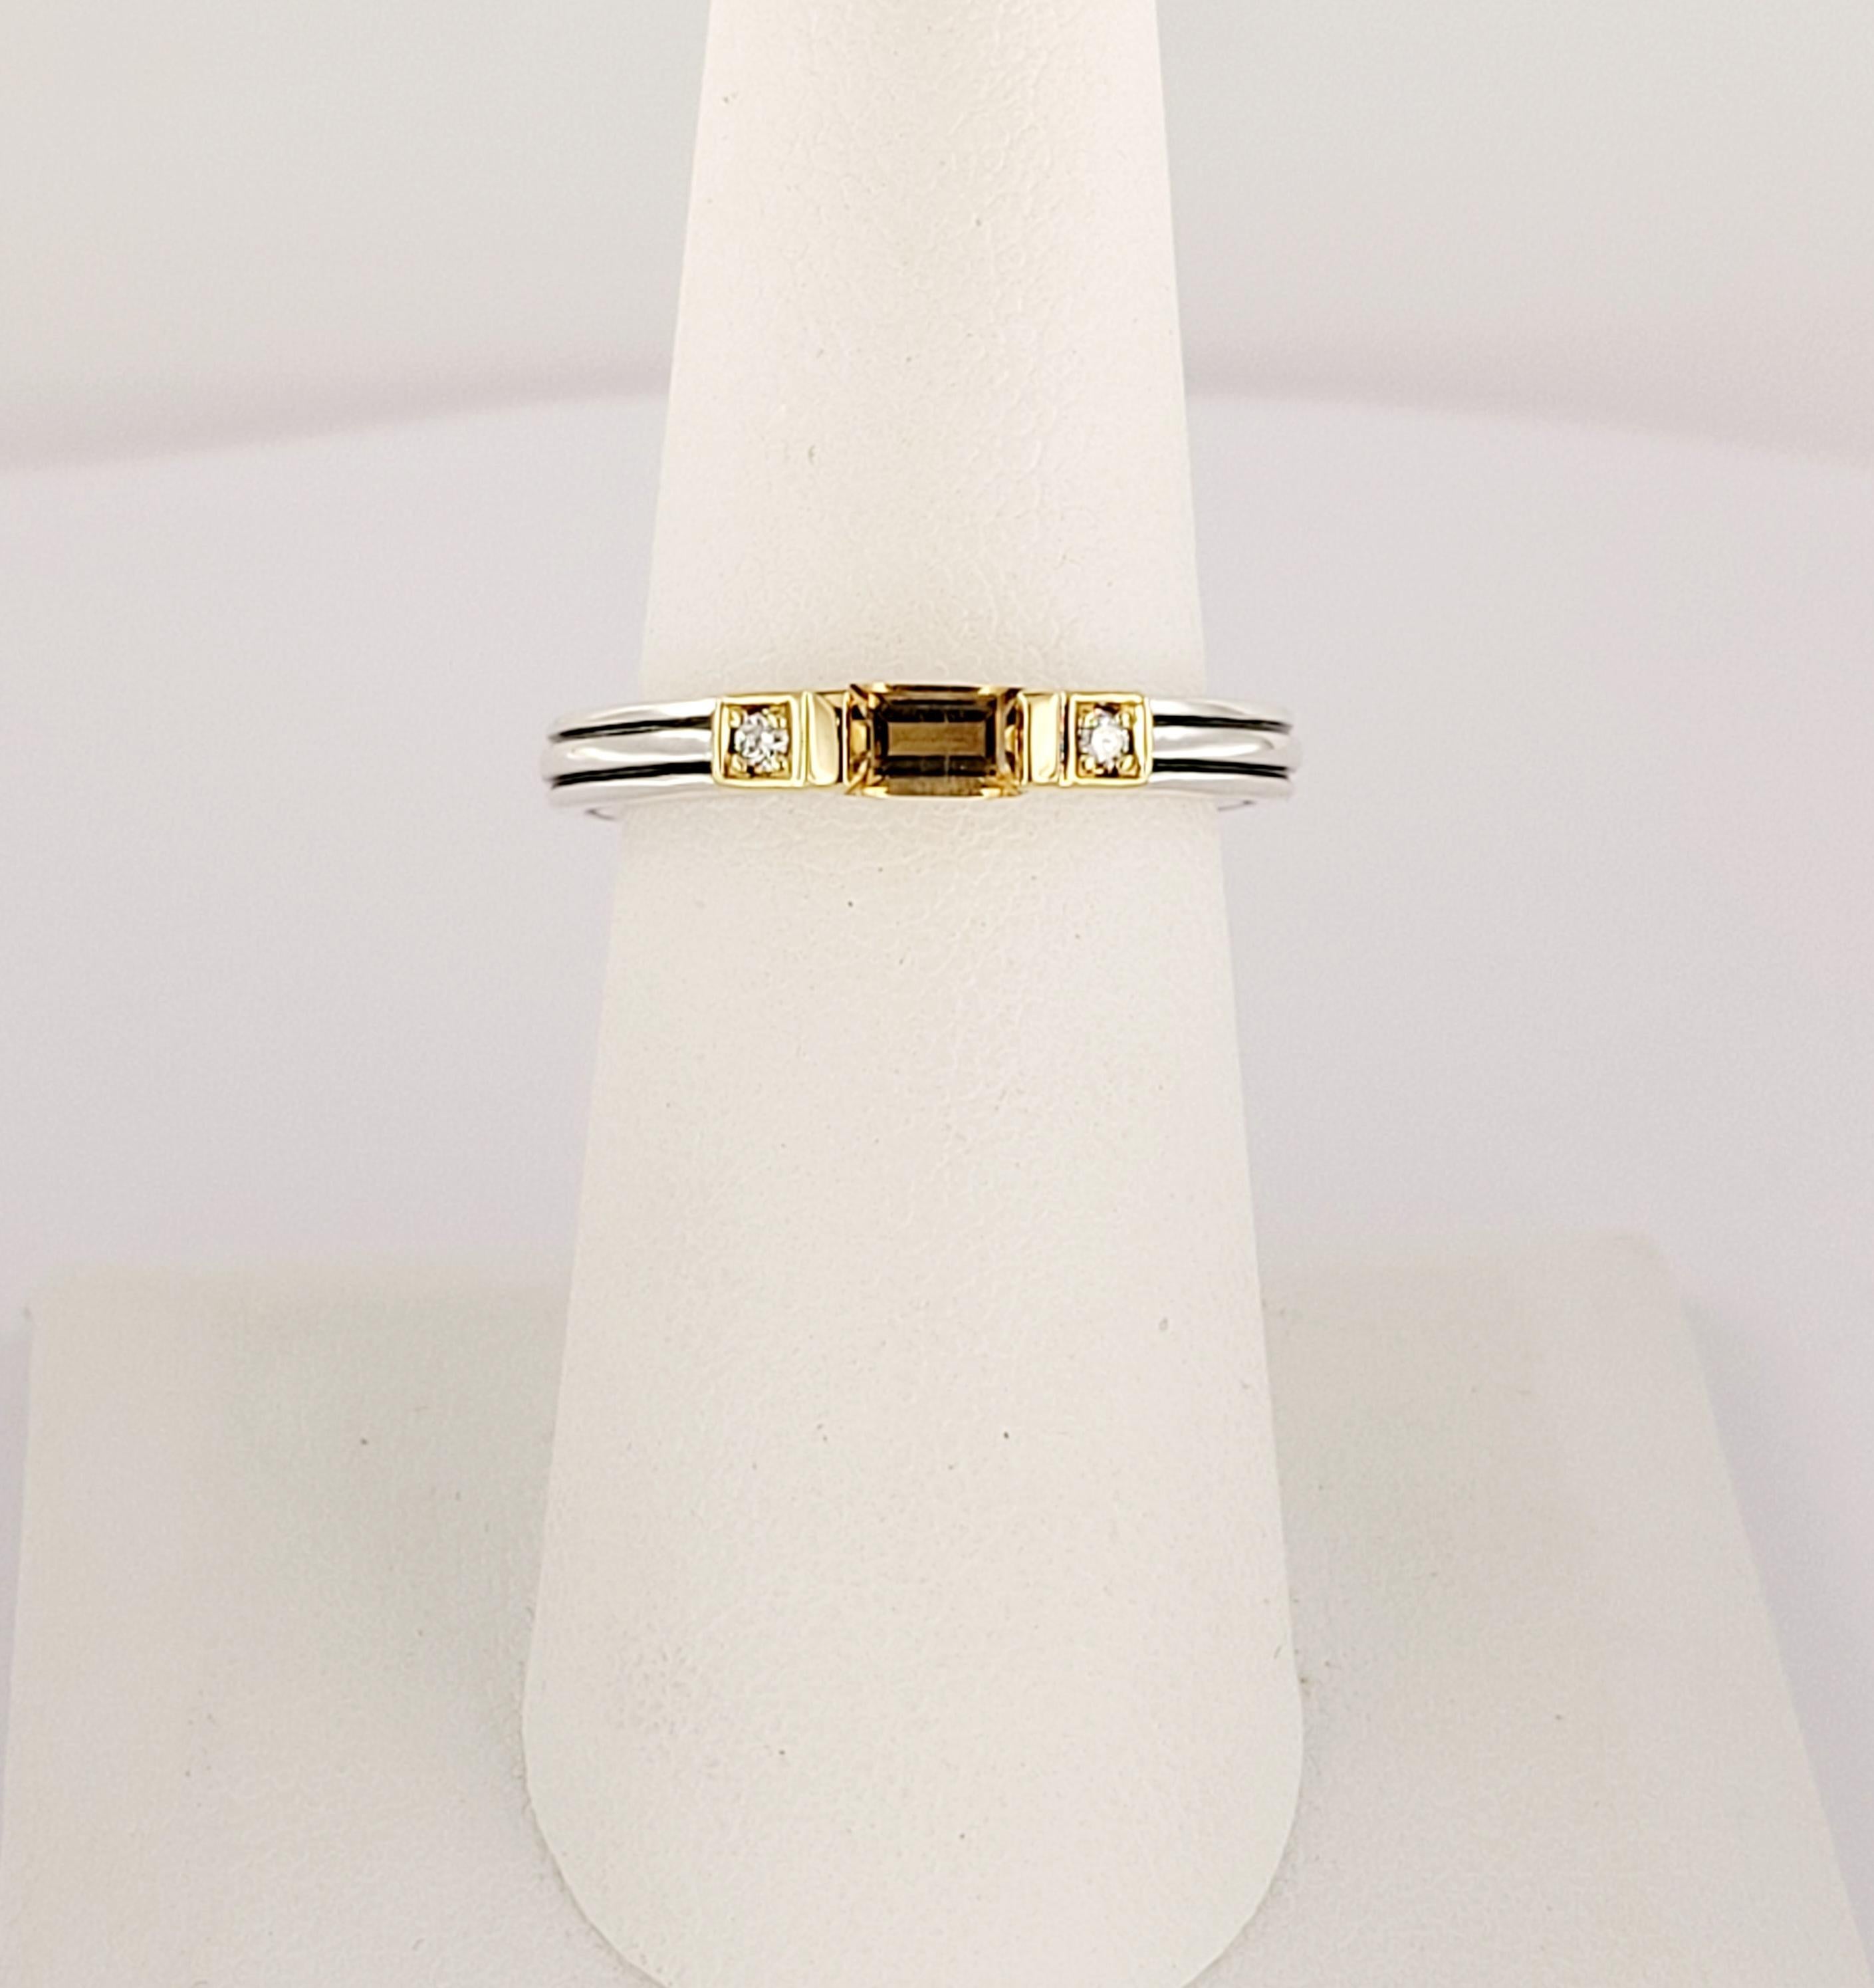 BRAND  LAGOS  
Sterling Silver & 18K Yellow Gold 
Ring Size 6.75
Band width 2.6
Ring Weight 4gr 
Gender Women
Mint Condition, Like New